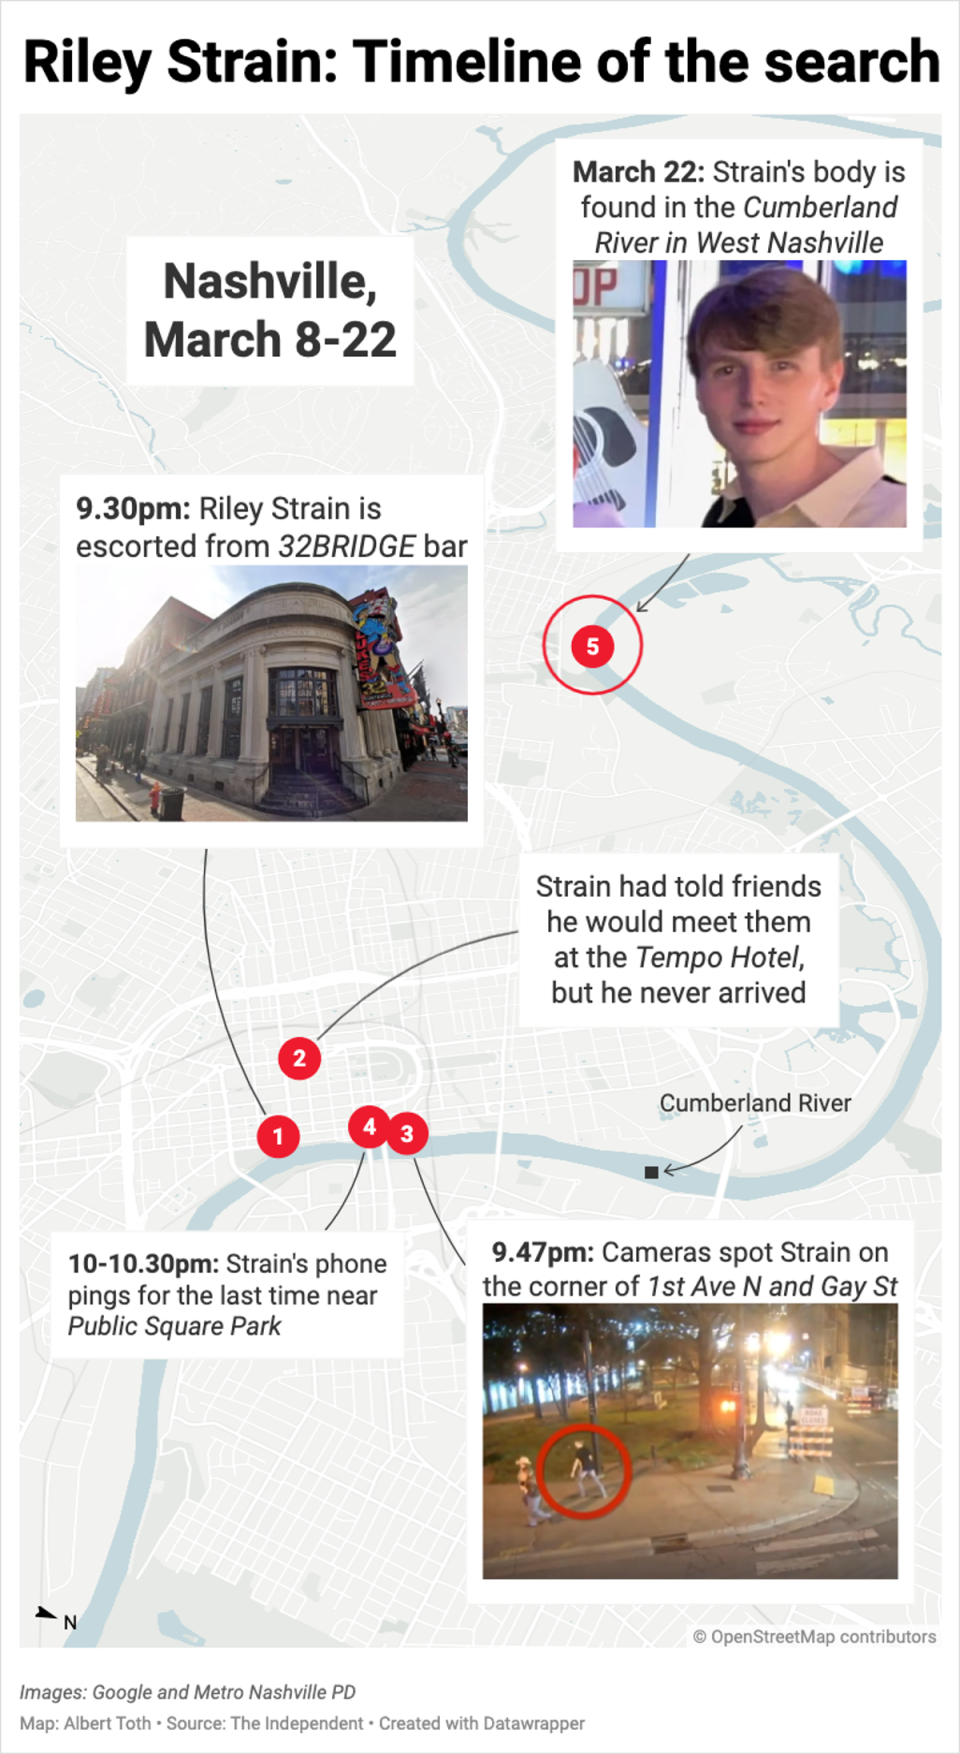 Timeline of Riley Strain’s disappearance and death (The Independent)